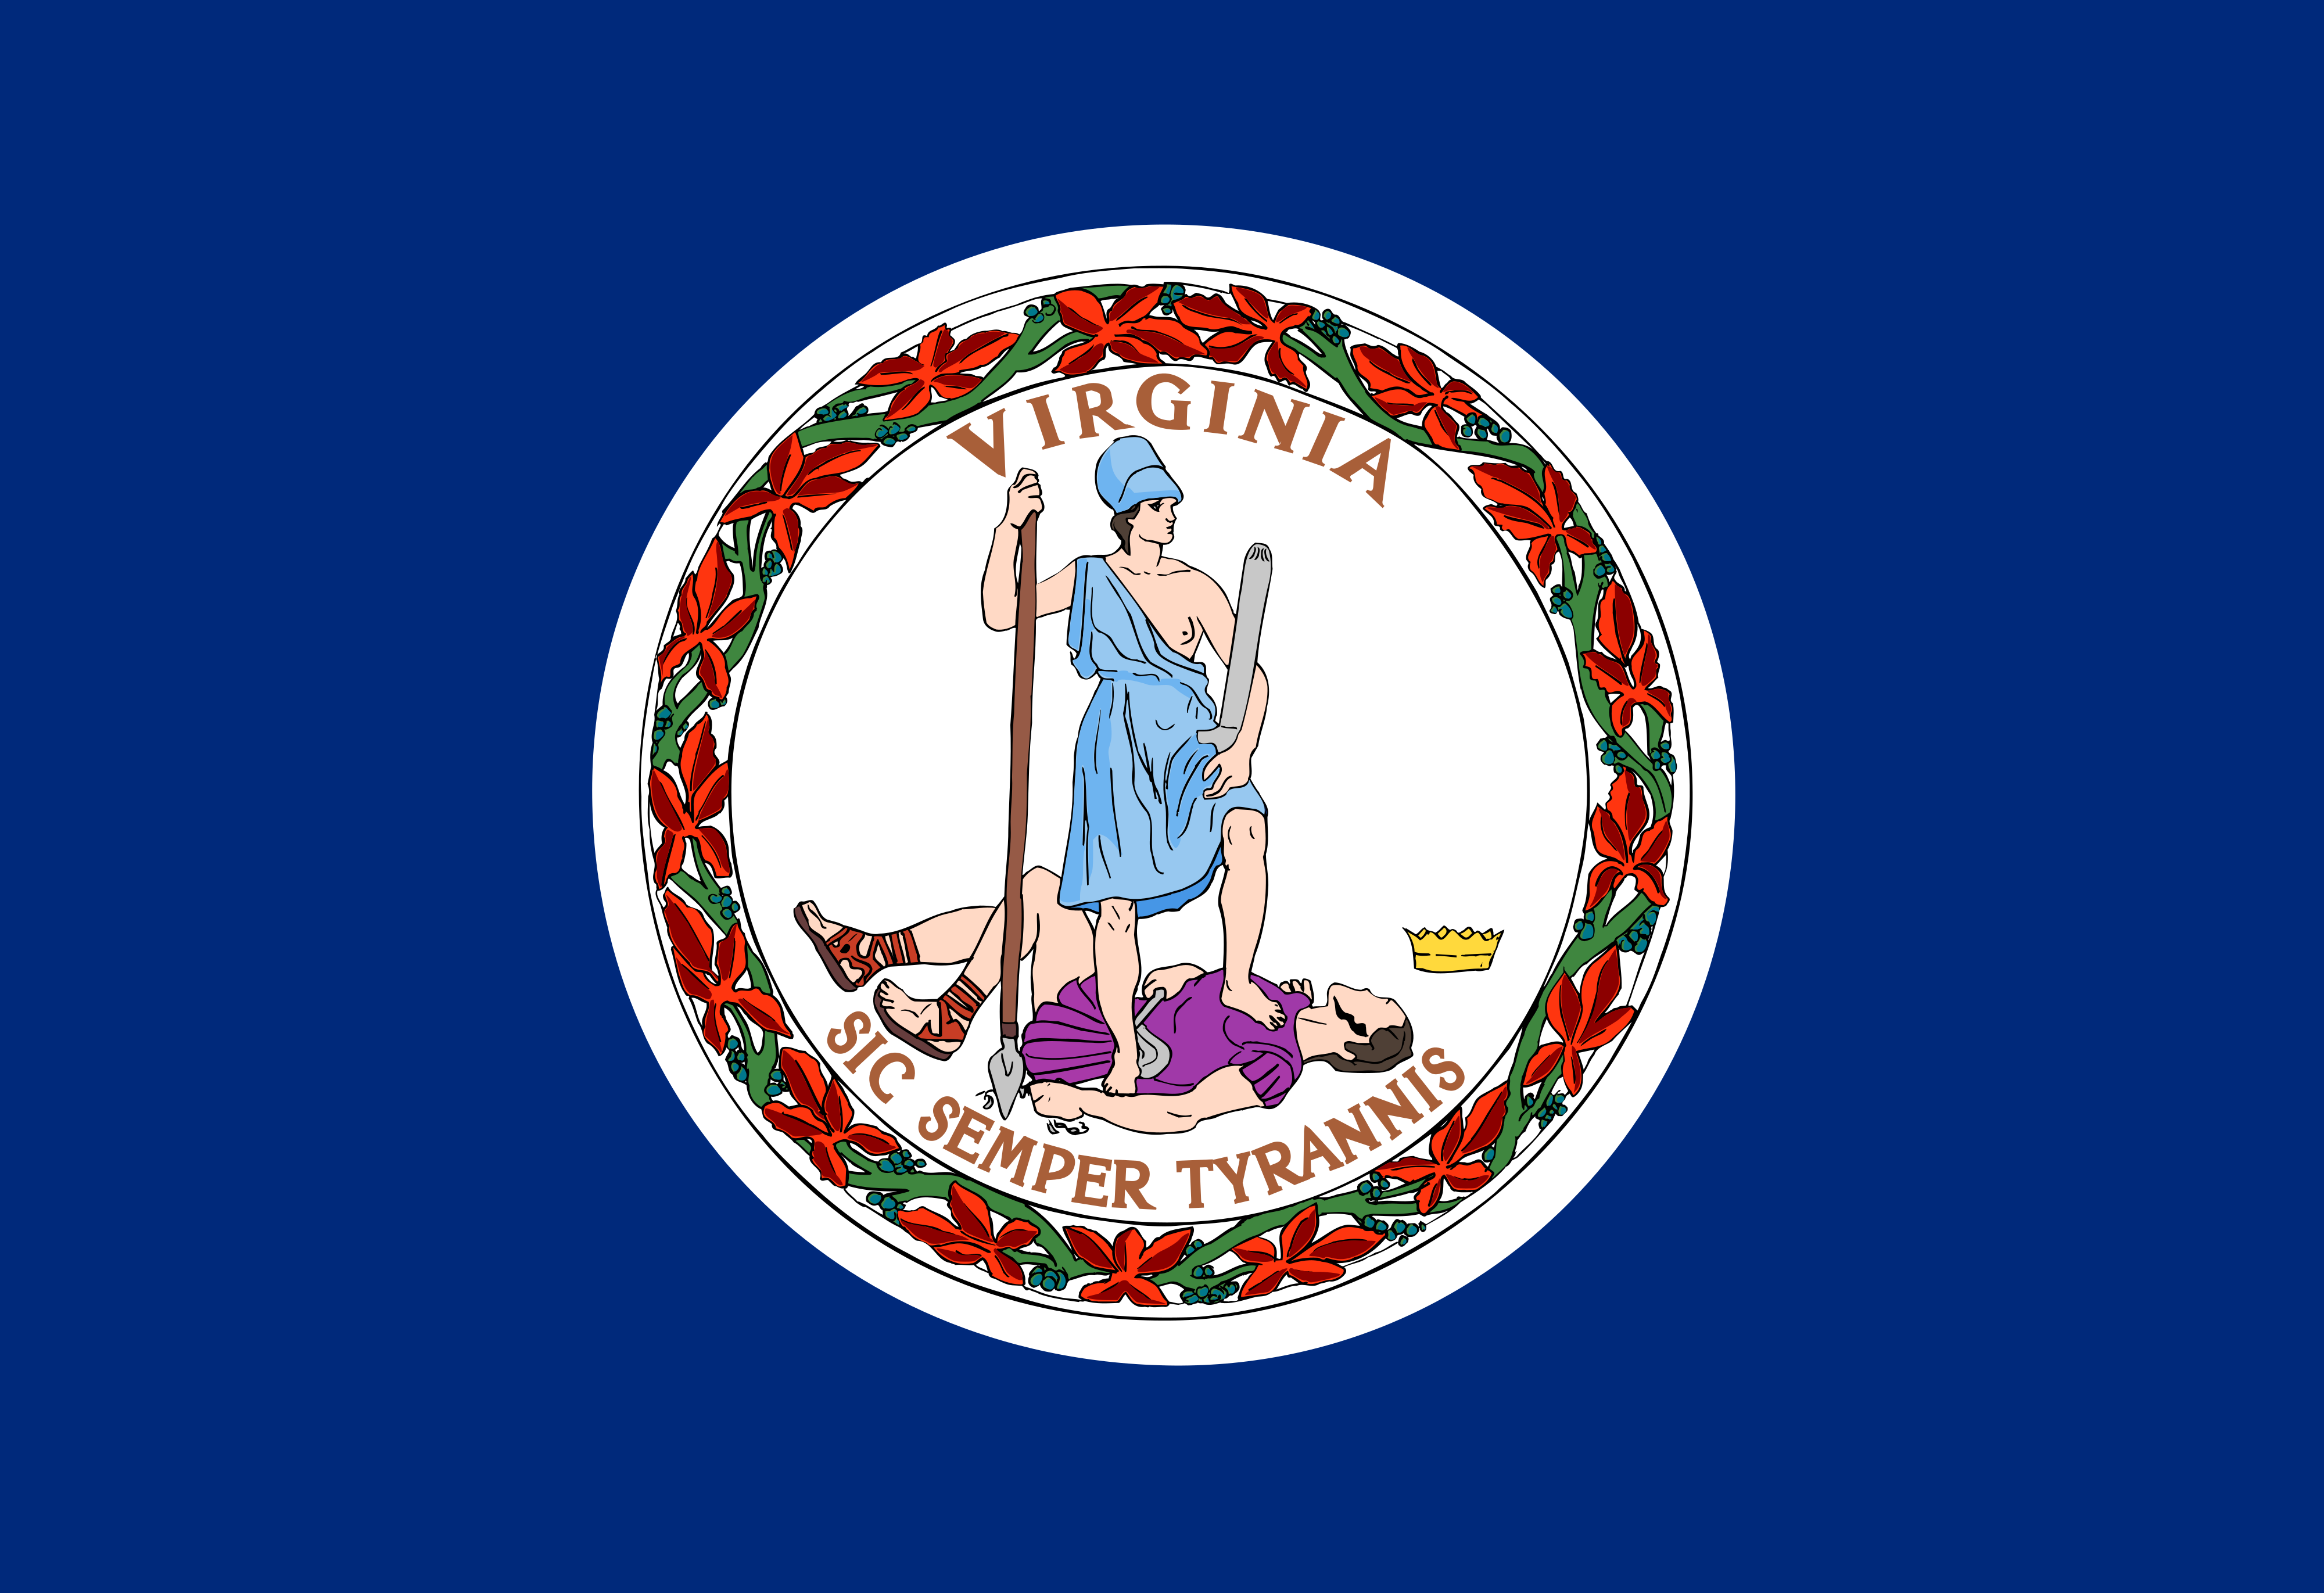 Free Virginia Flag Images: AI, EPS, GIF, JPG, PDF, PNG, SVG and more!